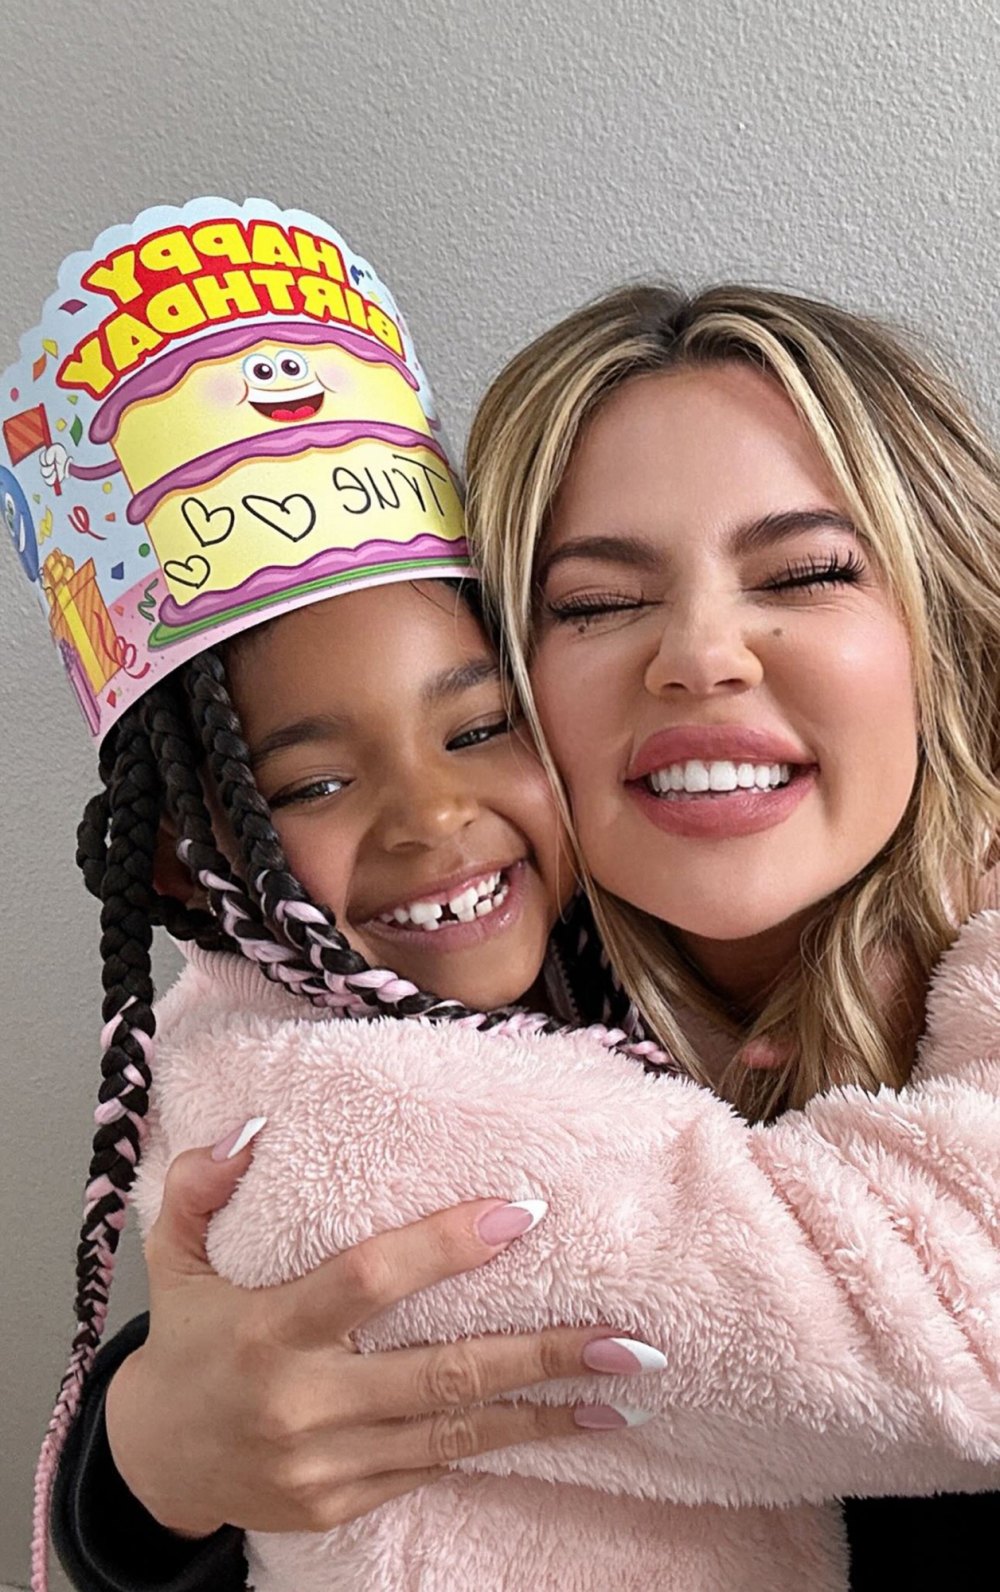 Khloe Kardashian’s Daughter True Thompson Turns 6: 'The Day My Life Changed Forever’